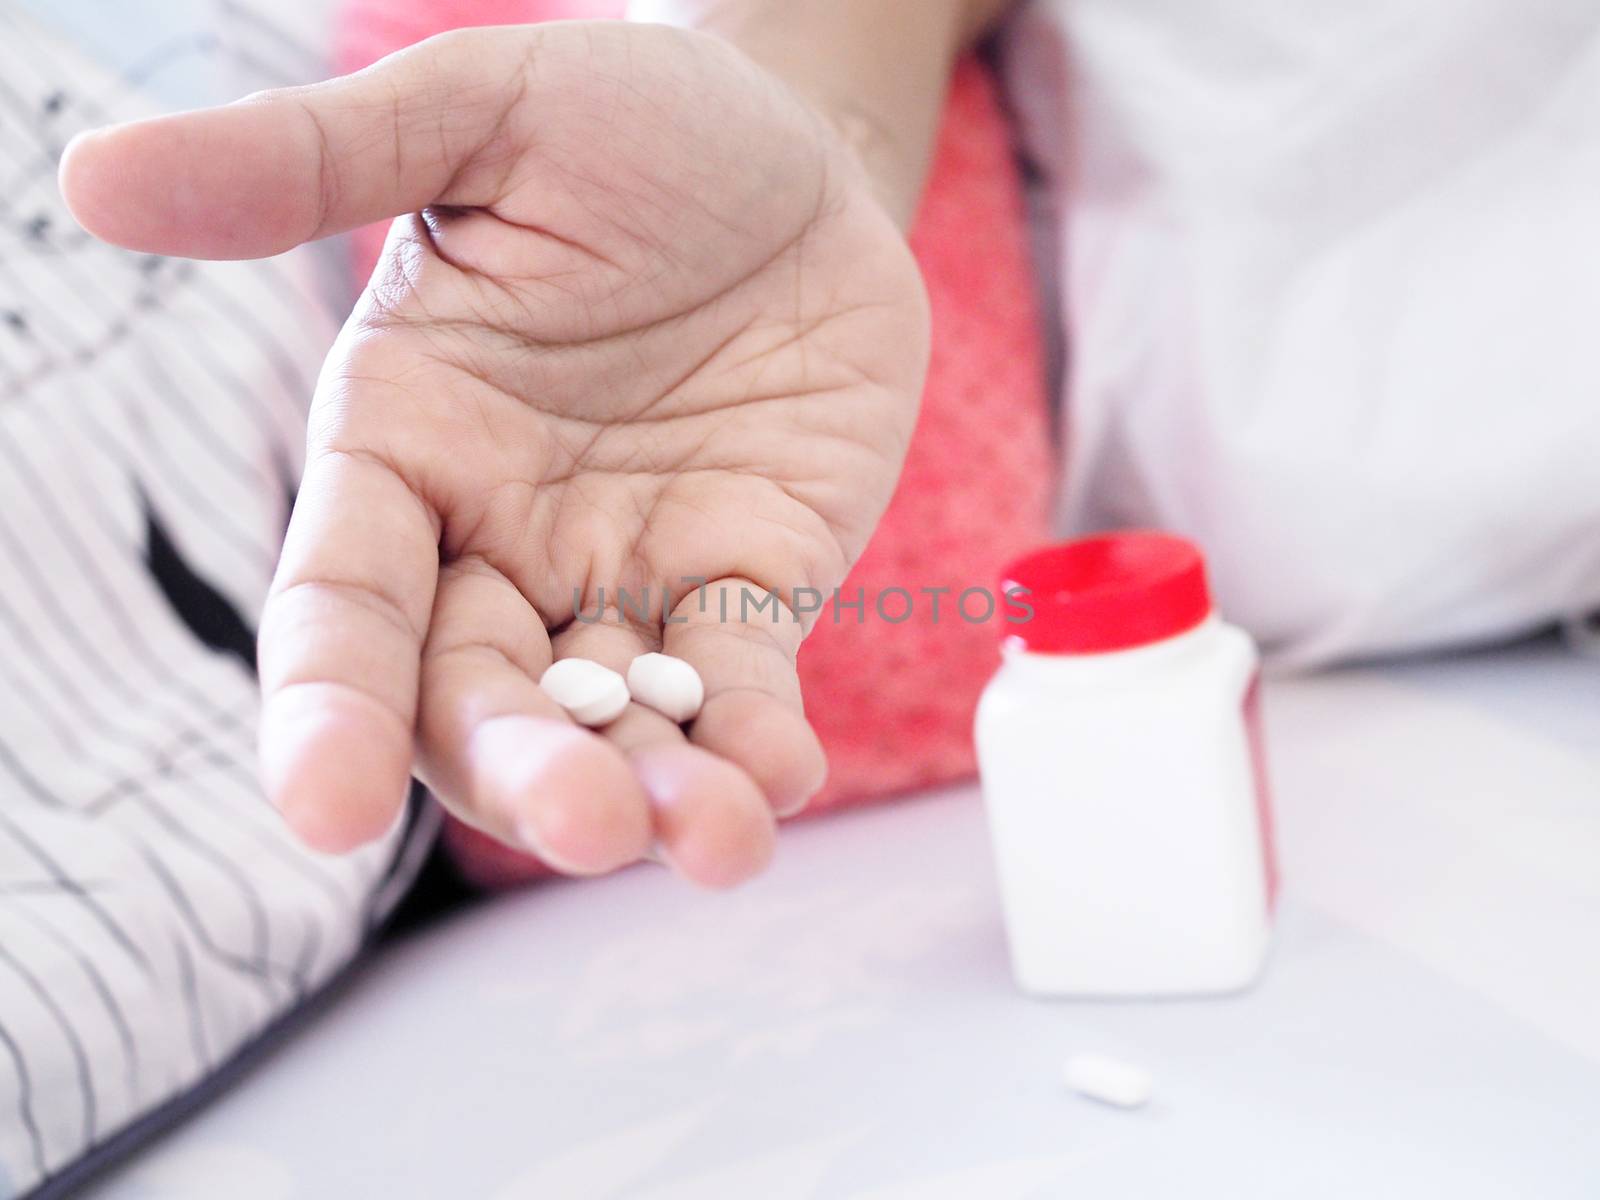 People with stomach pain, holding drugs or painkiller on hand by kittima05